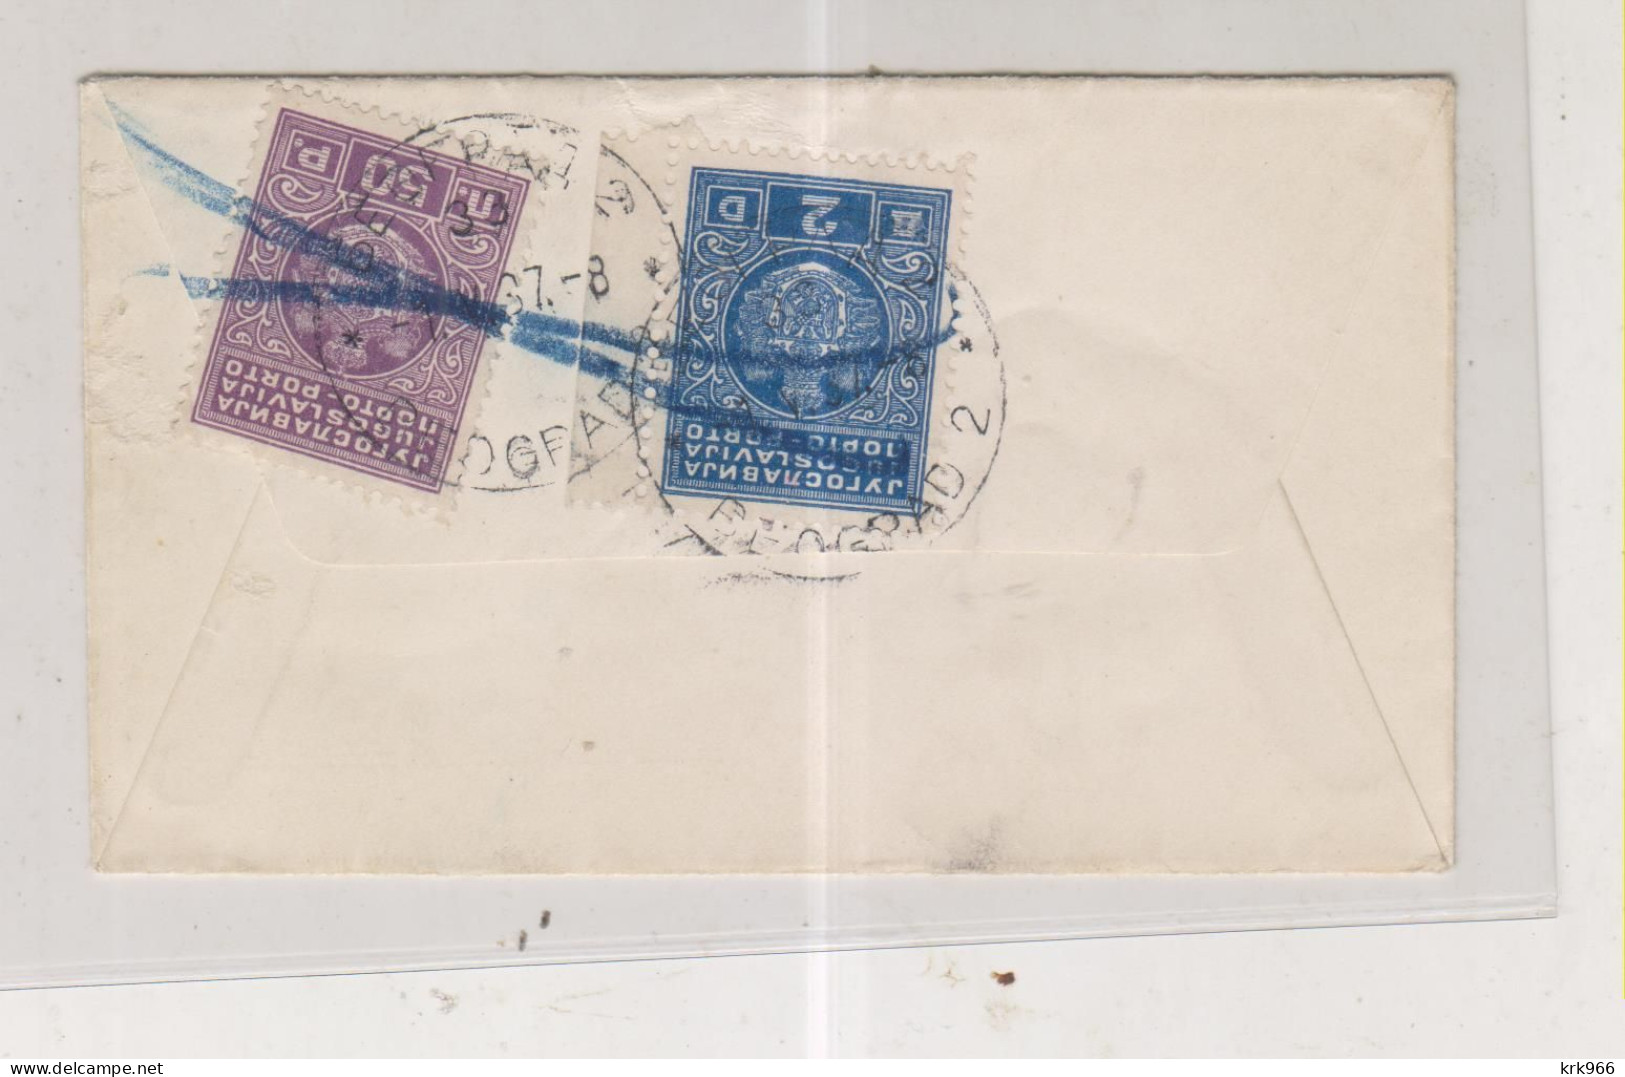 YUGOSLAVIA,1937 STIP Nice Cover To Beograd Postage Due - Covers & Documents